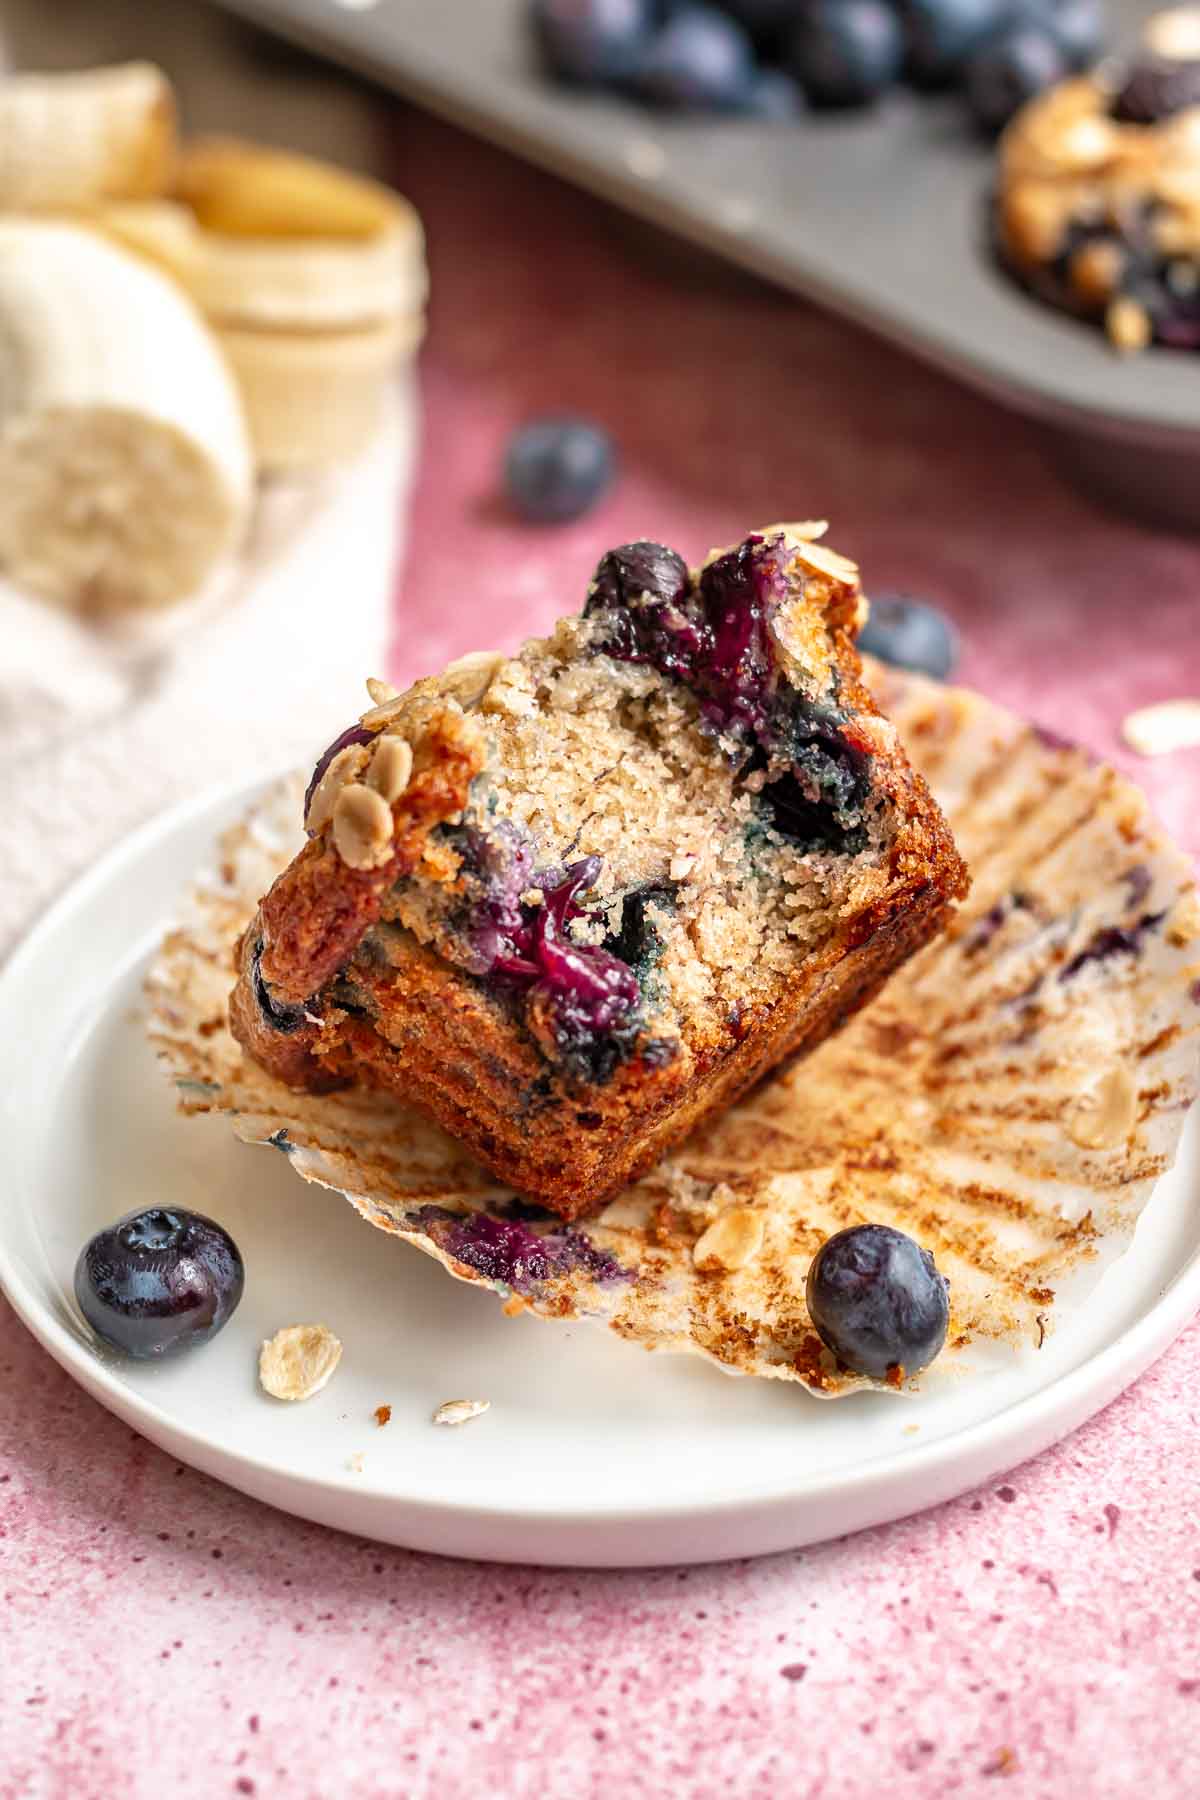 Blueberry muffin on a plate with a bite removed.